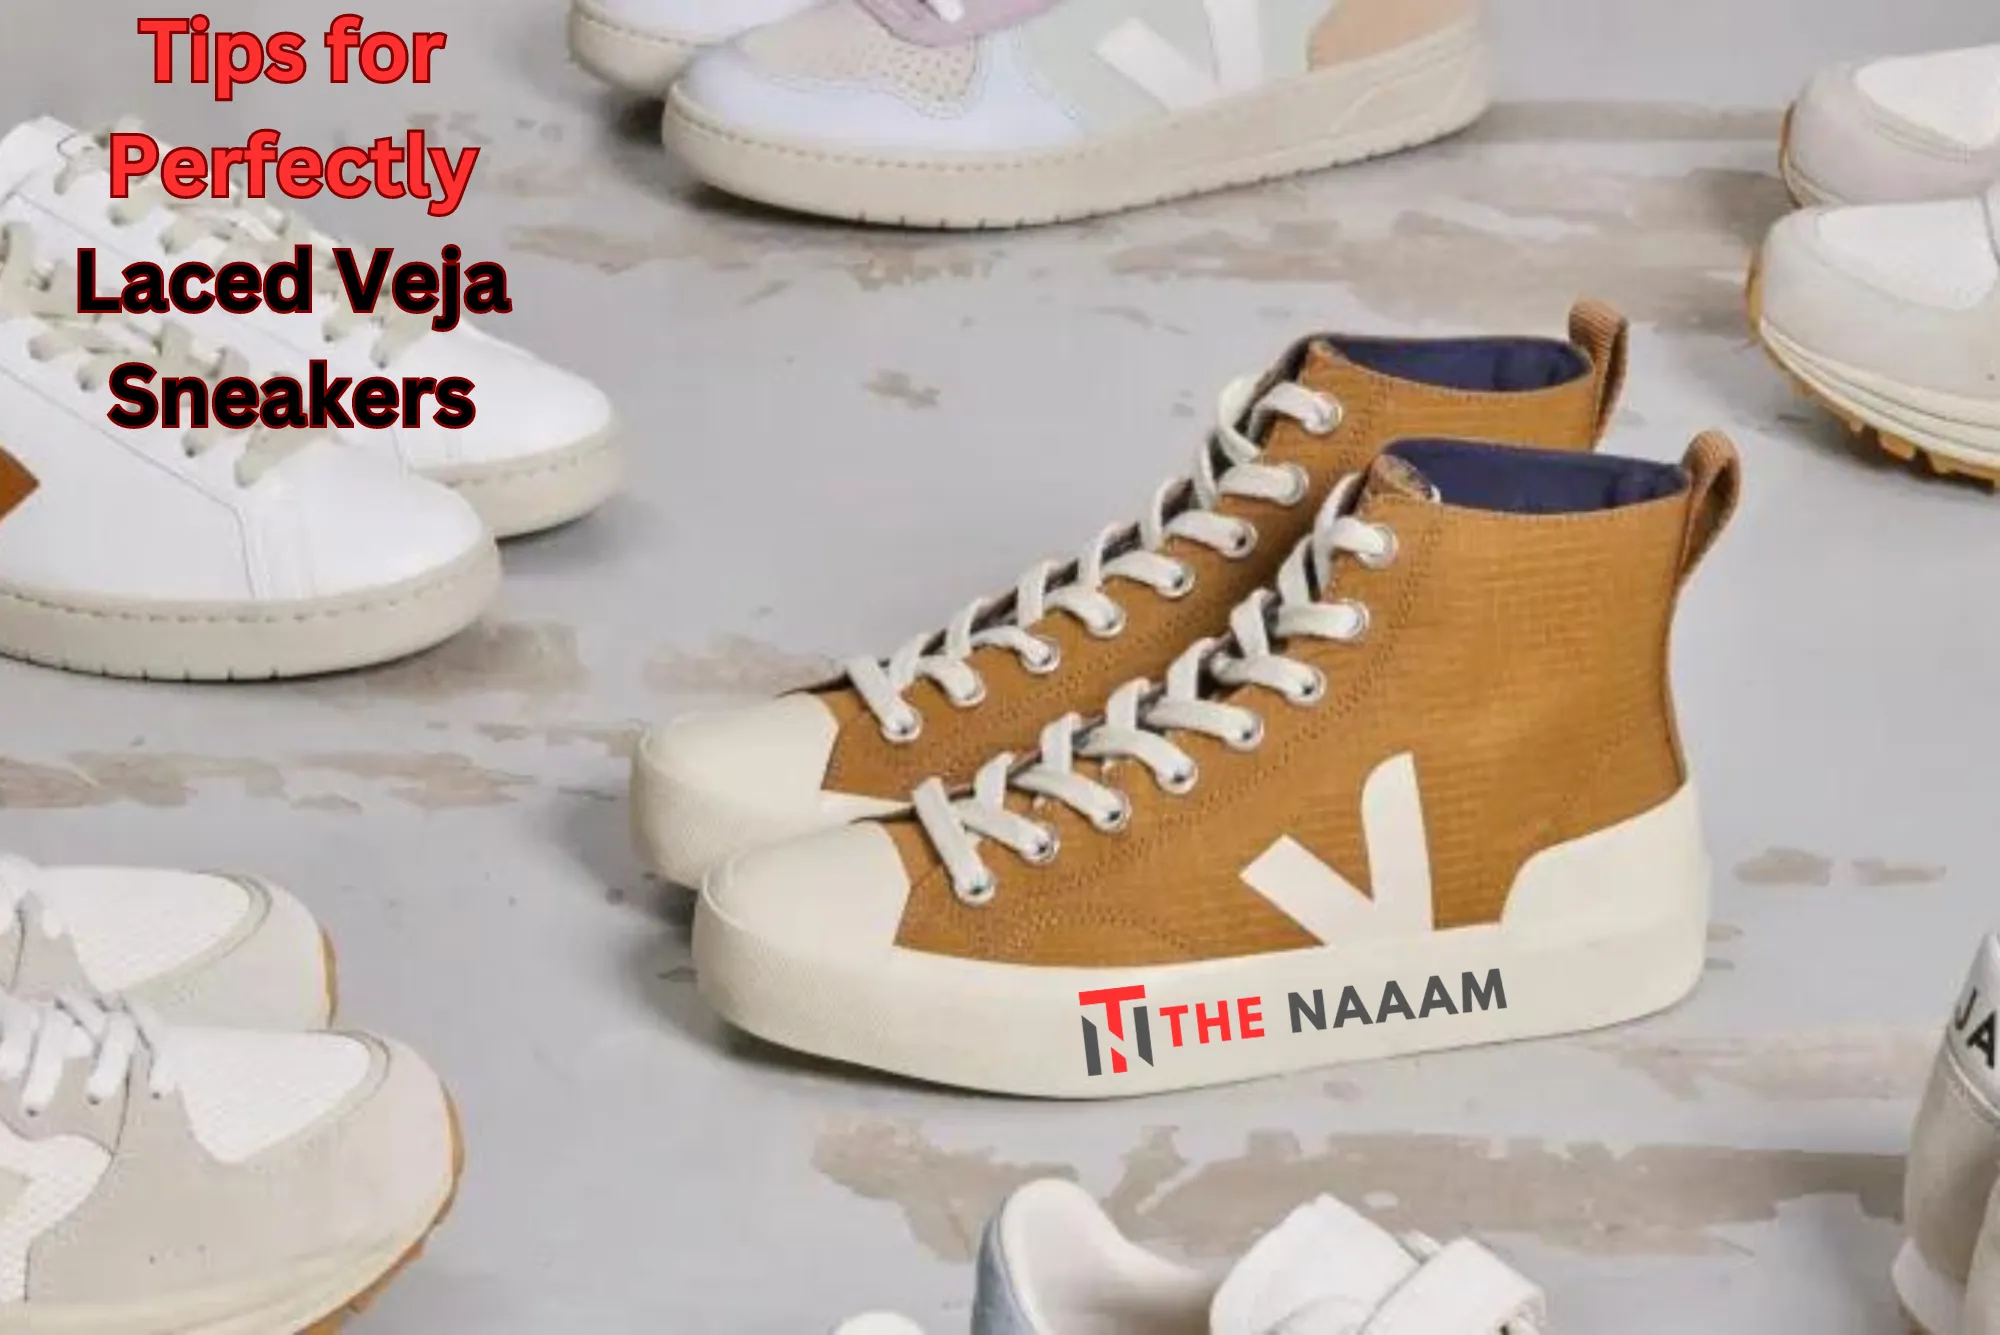 Tips for Perfectly Laced Veja Sneakers